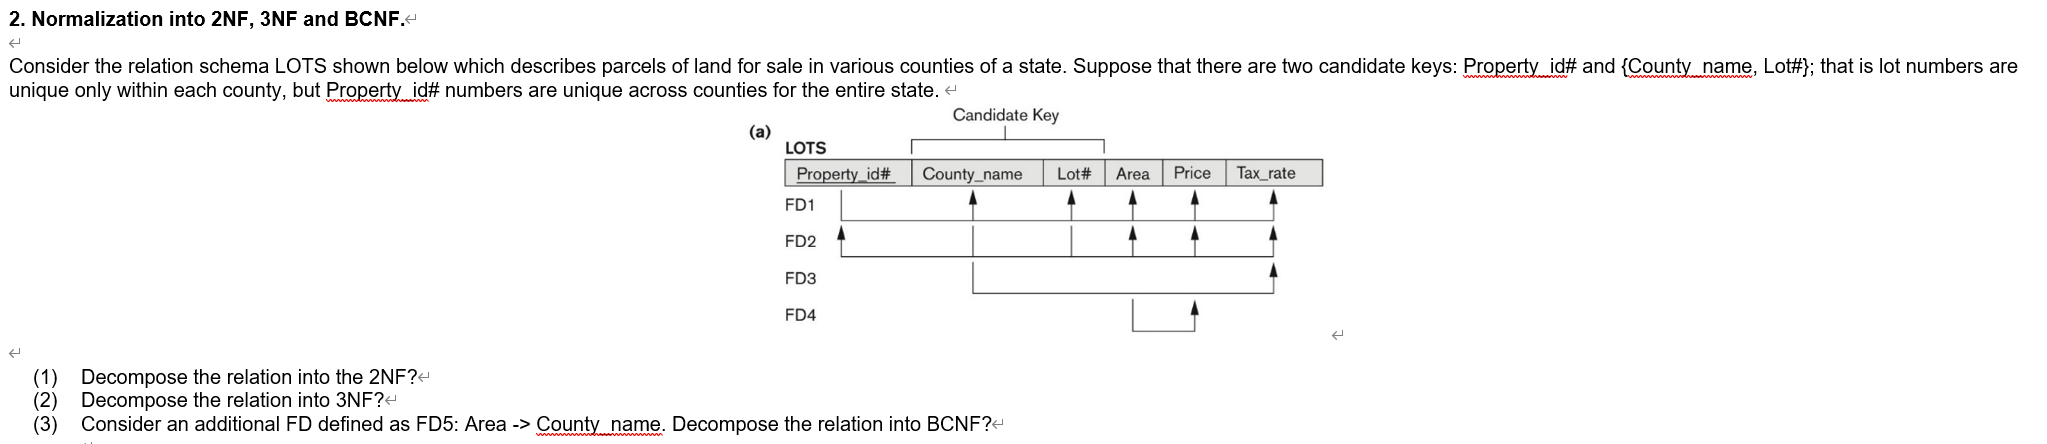 2. Normalization into 2NF, 3NF and BCNF.- Consider the relation schema LOTS shown below which describes parcels of land for s